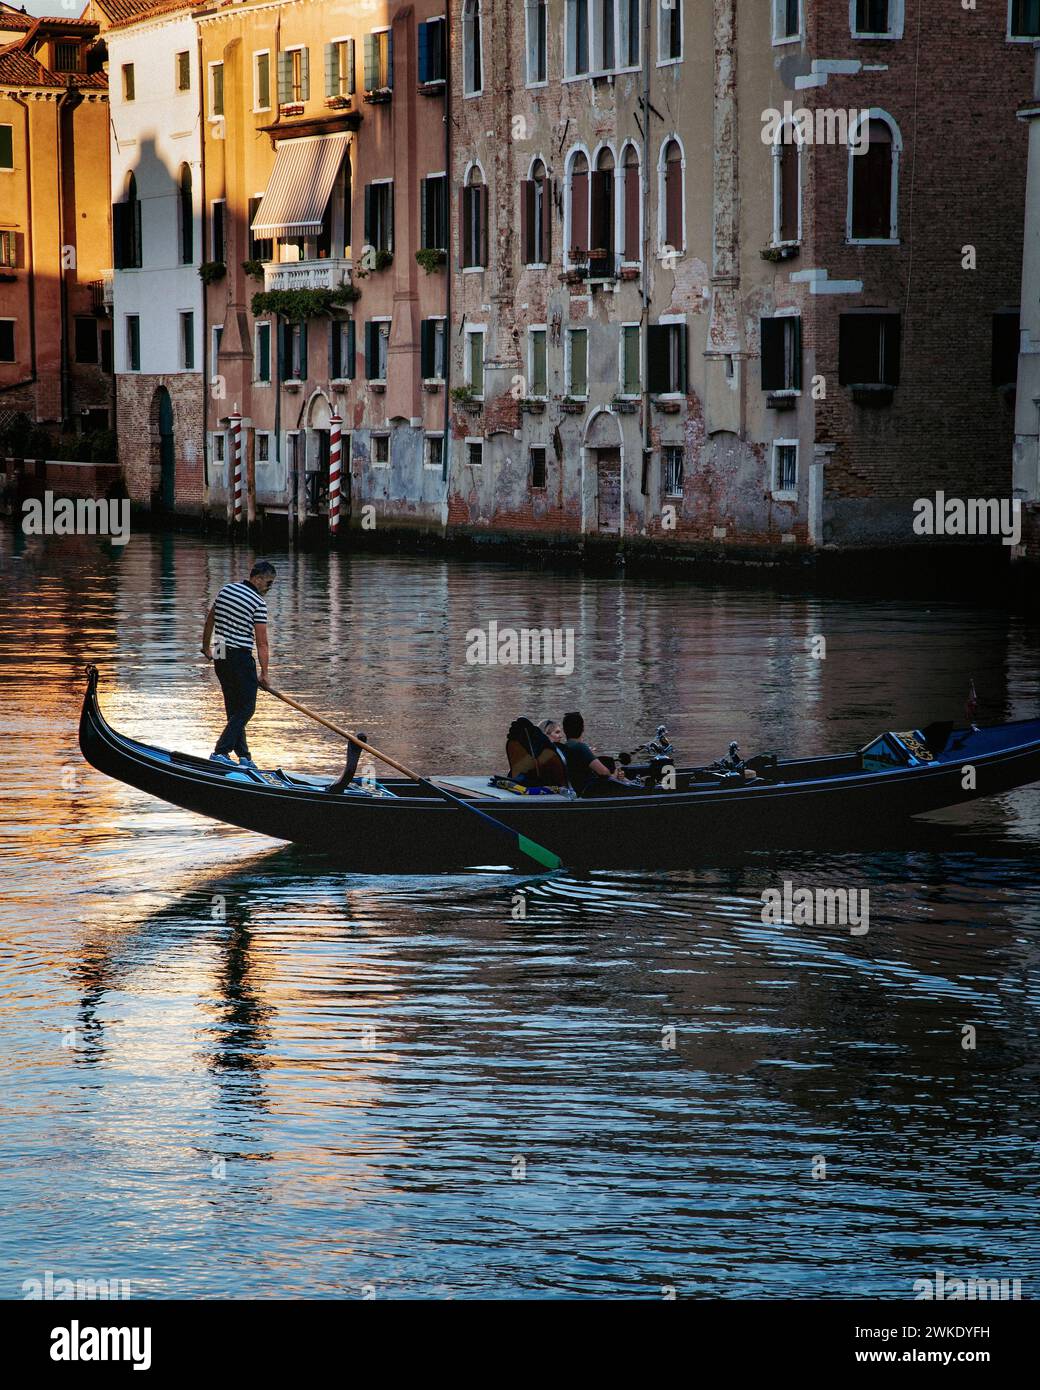 A couple enjoys a gondola ride on one of many small side canals in historic Venice, Italy. Stock Photo